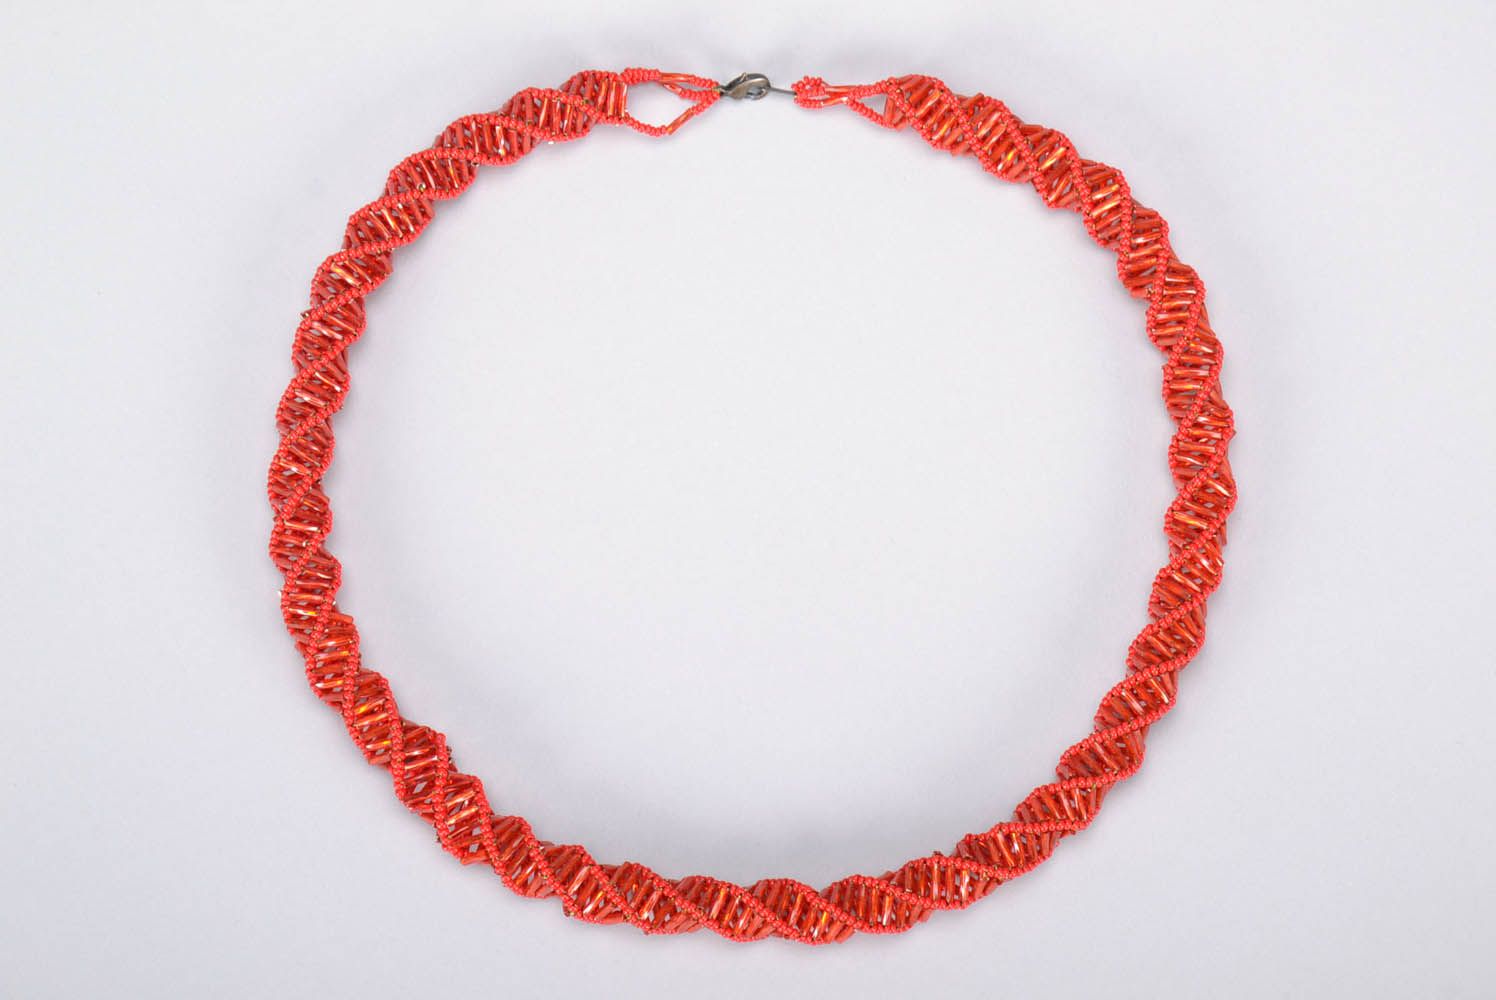 Lace beaded cord necklace photo 2